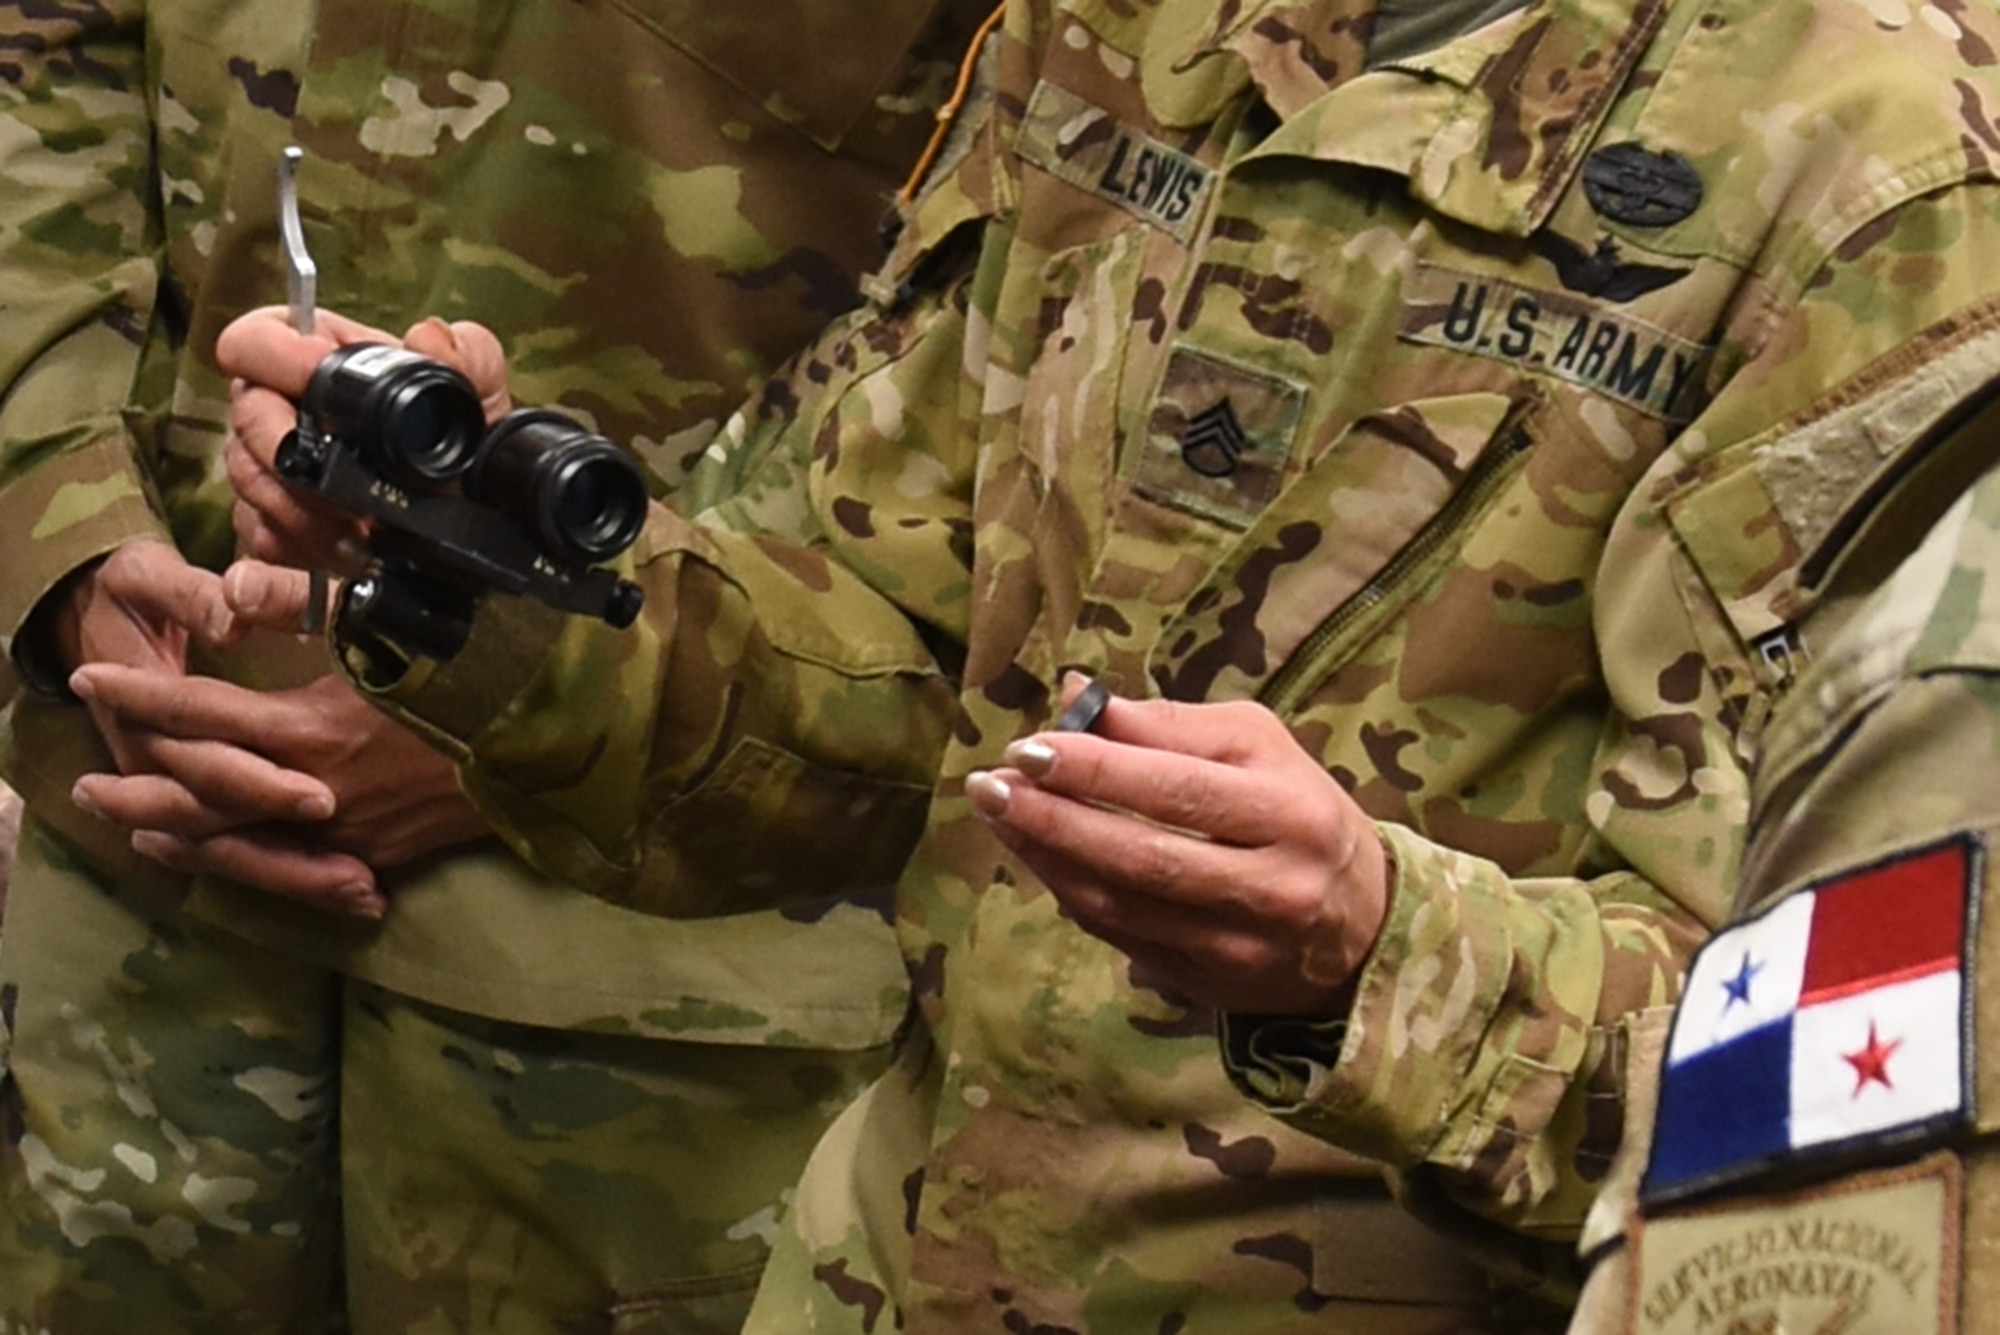 U.S. Army Staff Sgt. Michelle Lewis, an aviation life support equipment (ALSE) NCO technician assigned to the Missouri Army National Guard’s 1-135th Attack Reconnaissance Battalion, explains how to properly focus Night Vision Goggles (NVGs) when performing maintenance to members of the Panamanian Public Forces at Whiteman Air Force Base, Mo., March 16, 2016. During the visit, six representatives from the Public Forces participated in a subject matter exchange with the Missouri National Guard, covering topics including aviation life support and NVGs.
(U.S. Air National Guard photo by Senior Master Sgt. Mary-Dale Amison)
